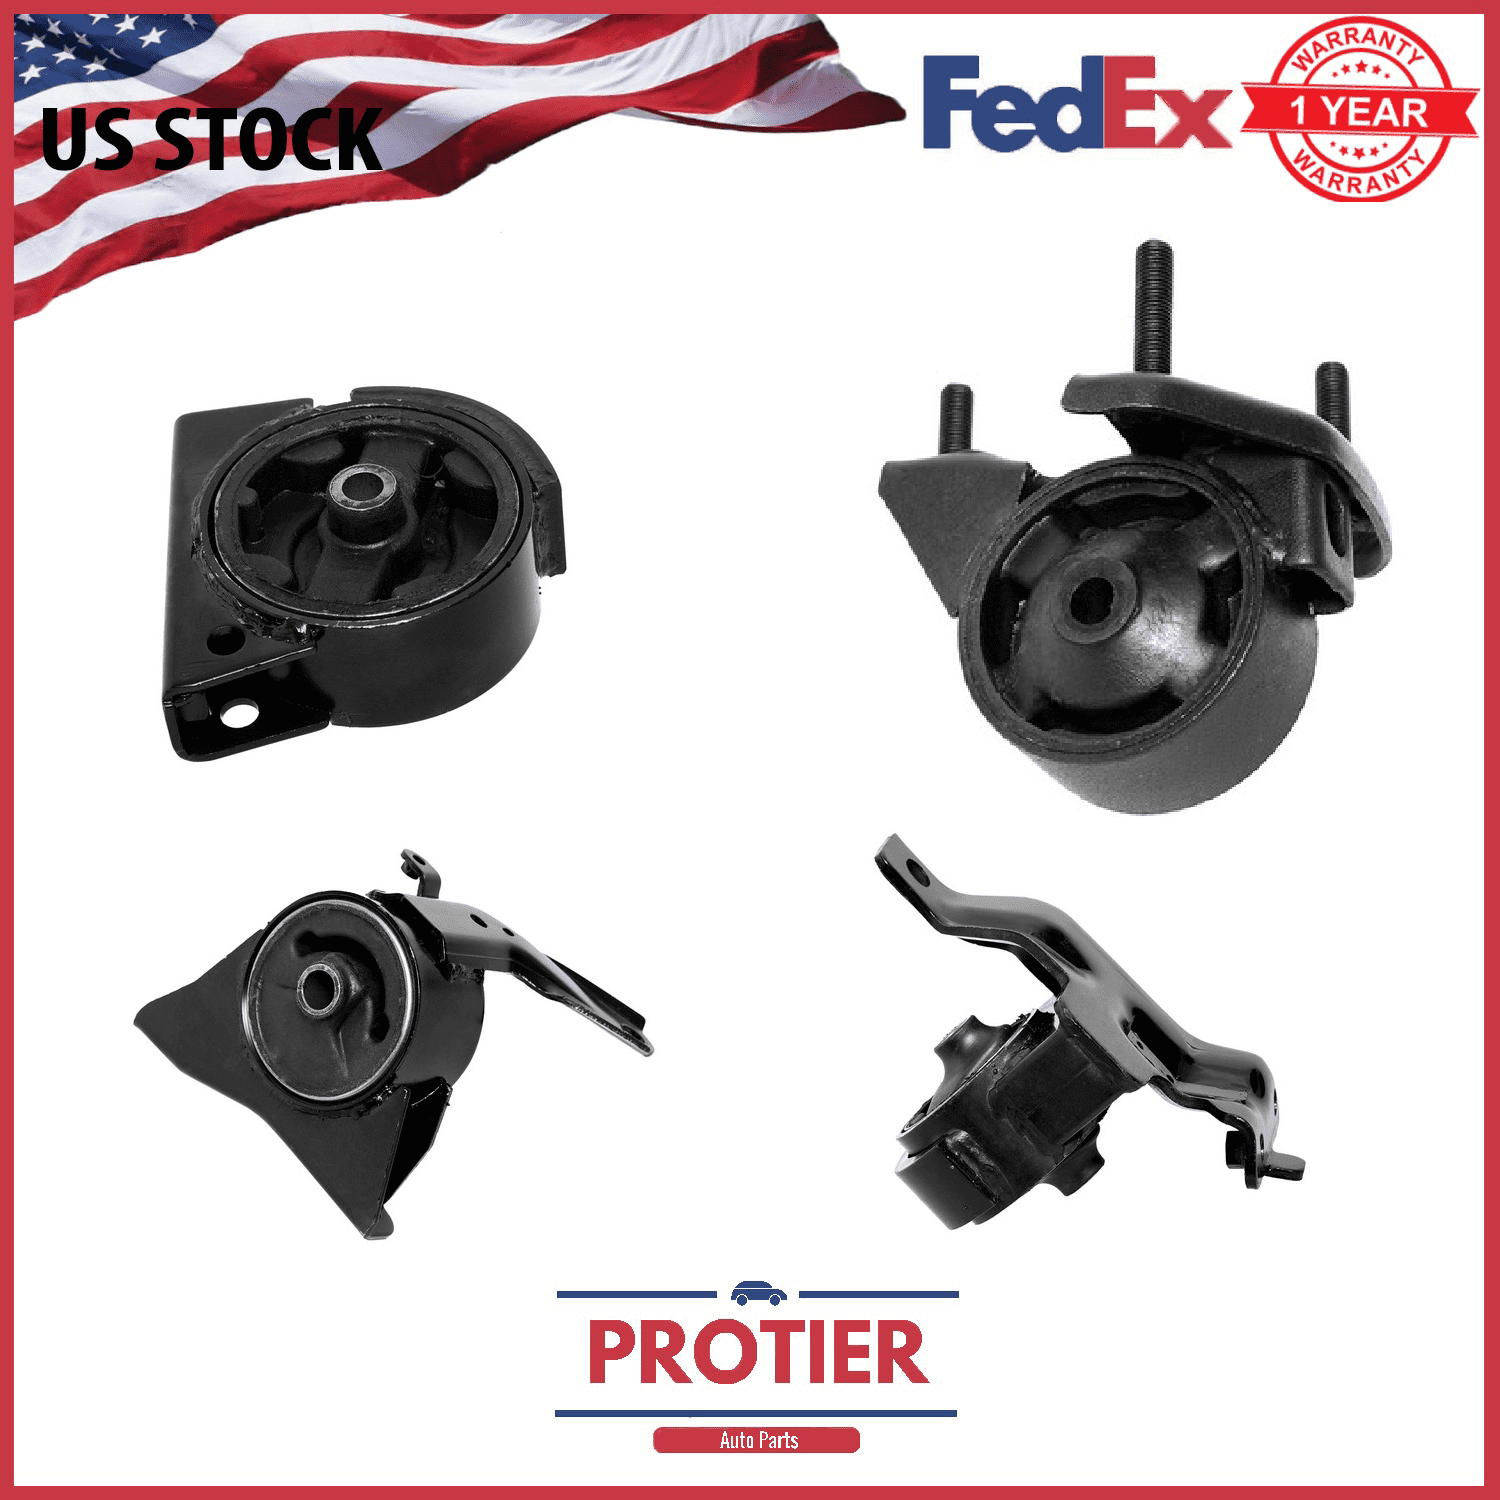 Engine Motor & Trans Mount Set 3PCS 1993-1997 for Toyota Corolla 1.8L for Auto.